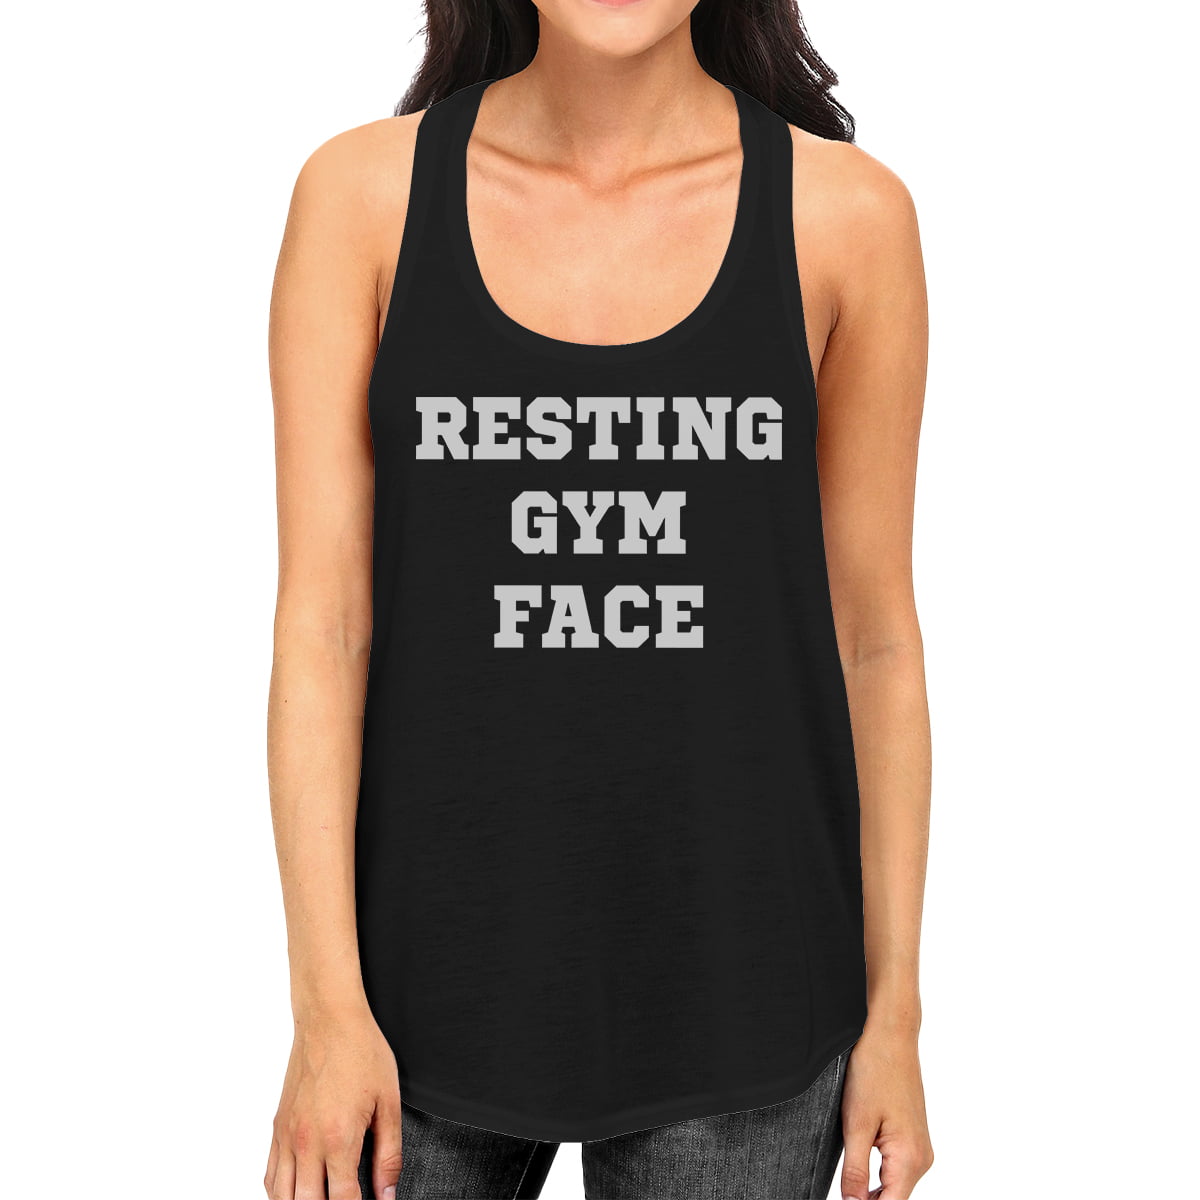 WINGZOO Workout Tank Tops for Women-Womens Finish Line Funny Saying Fitness Gym Racerback Sleeveless Shirts